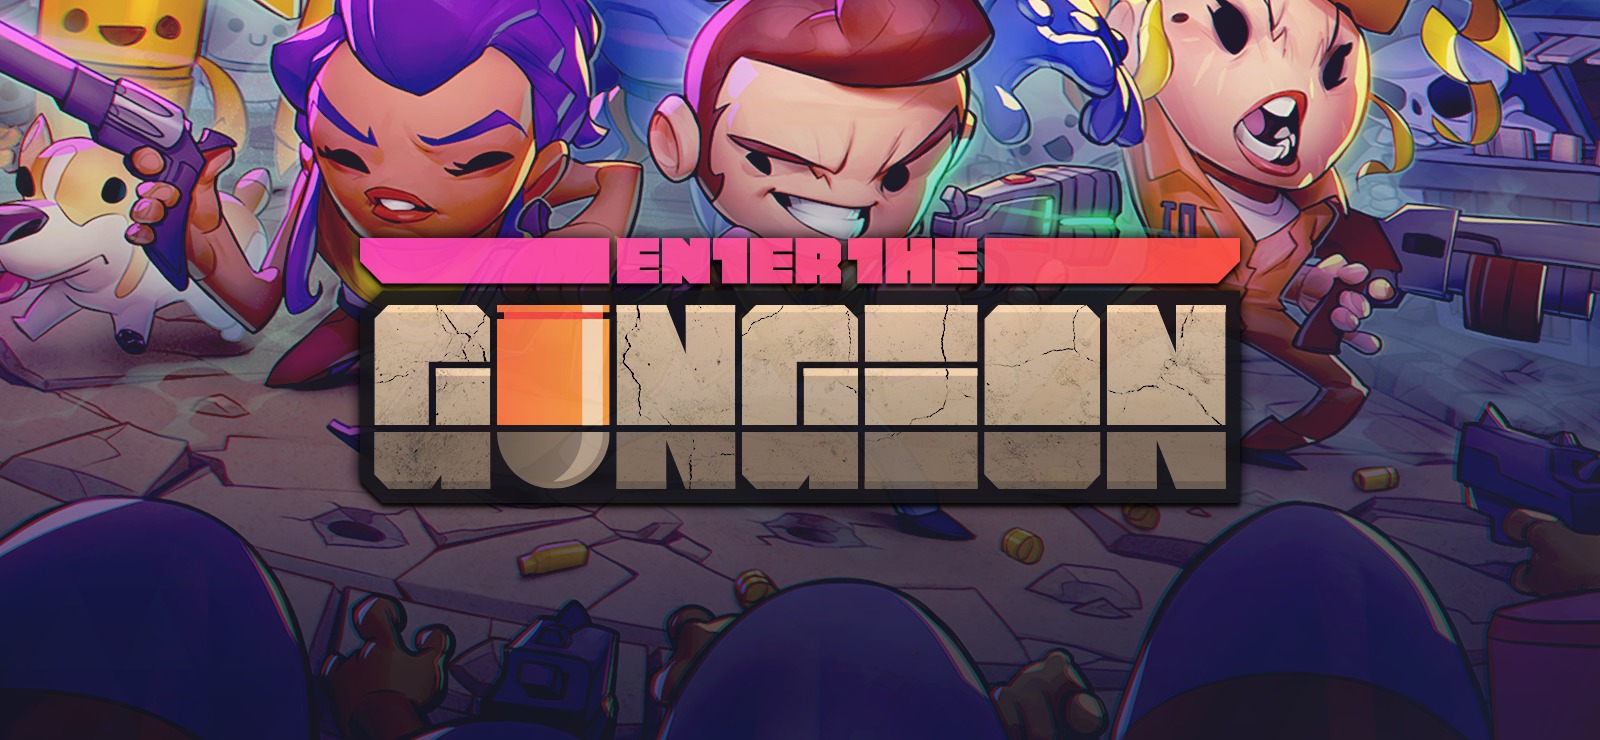 download enter the gungeon xbox for free